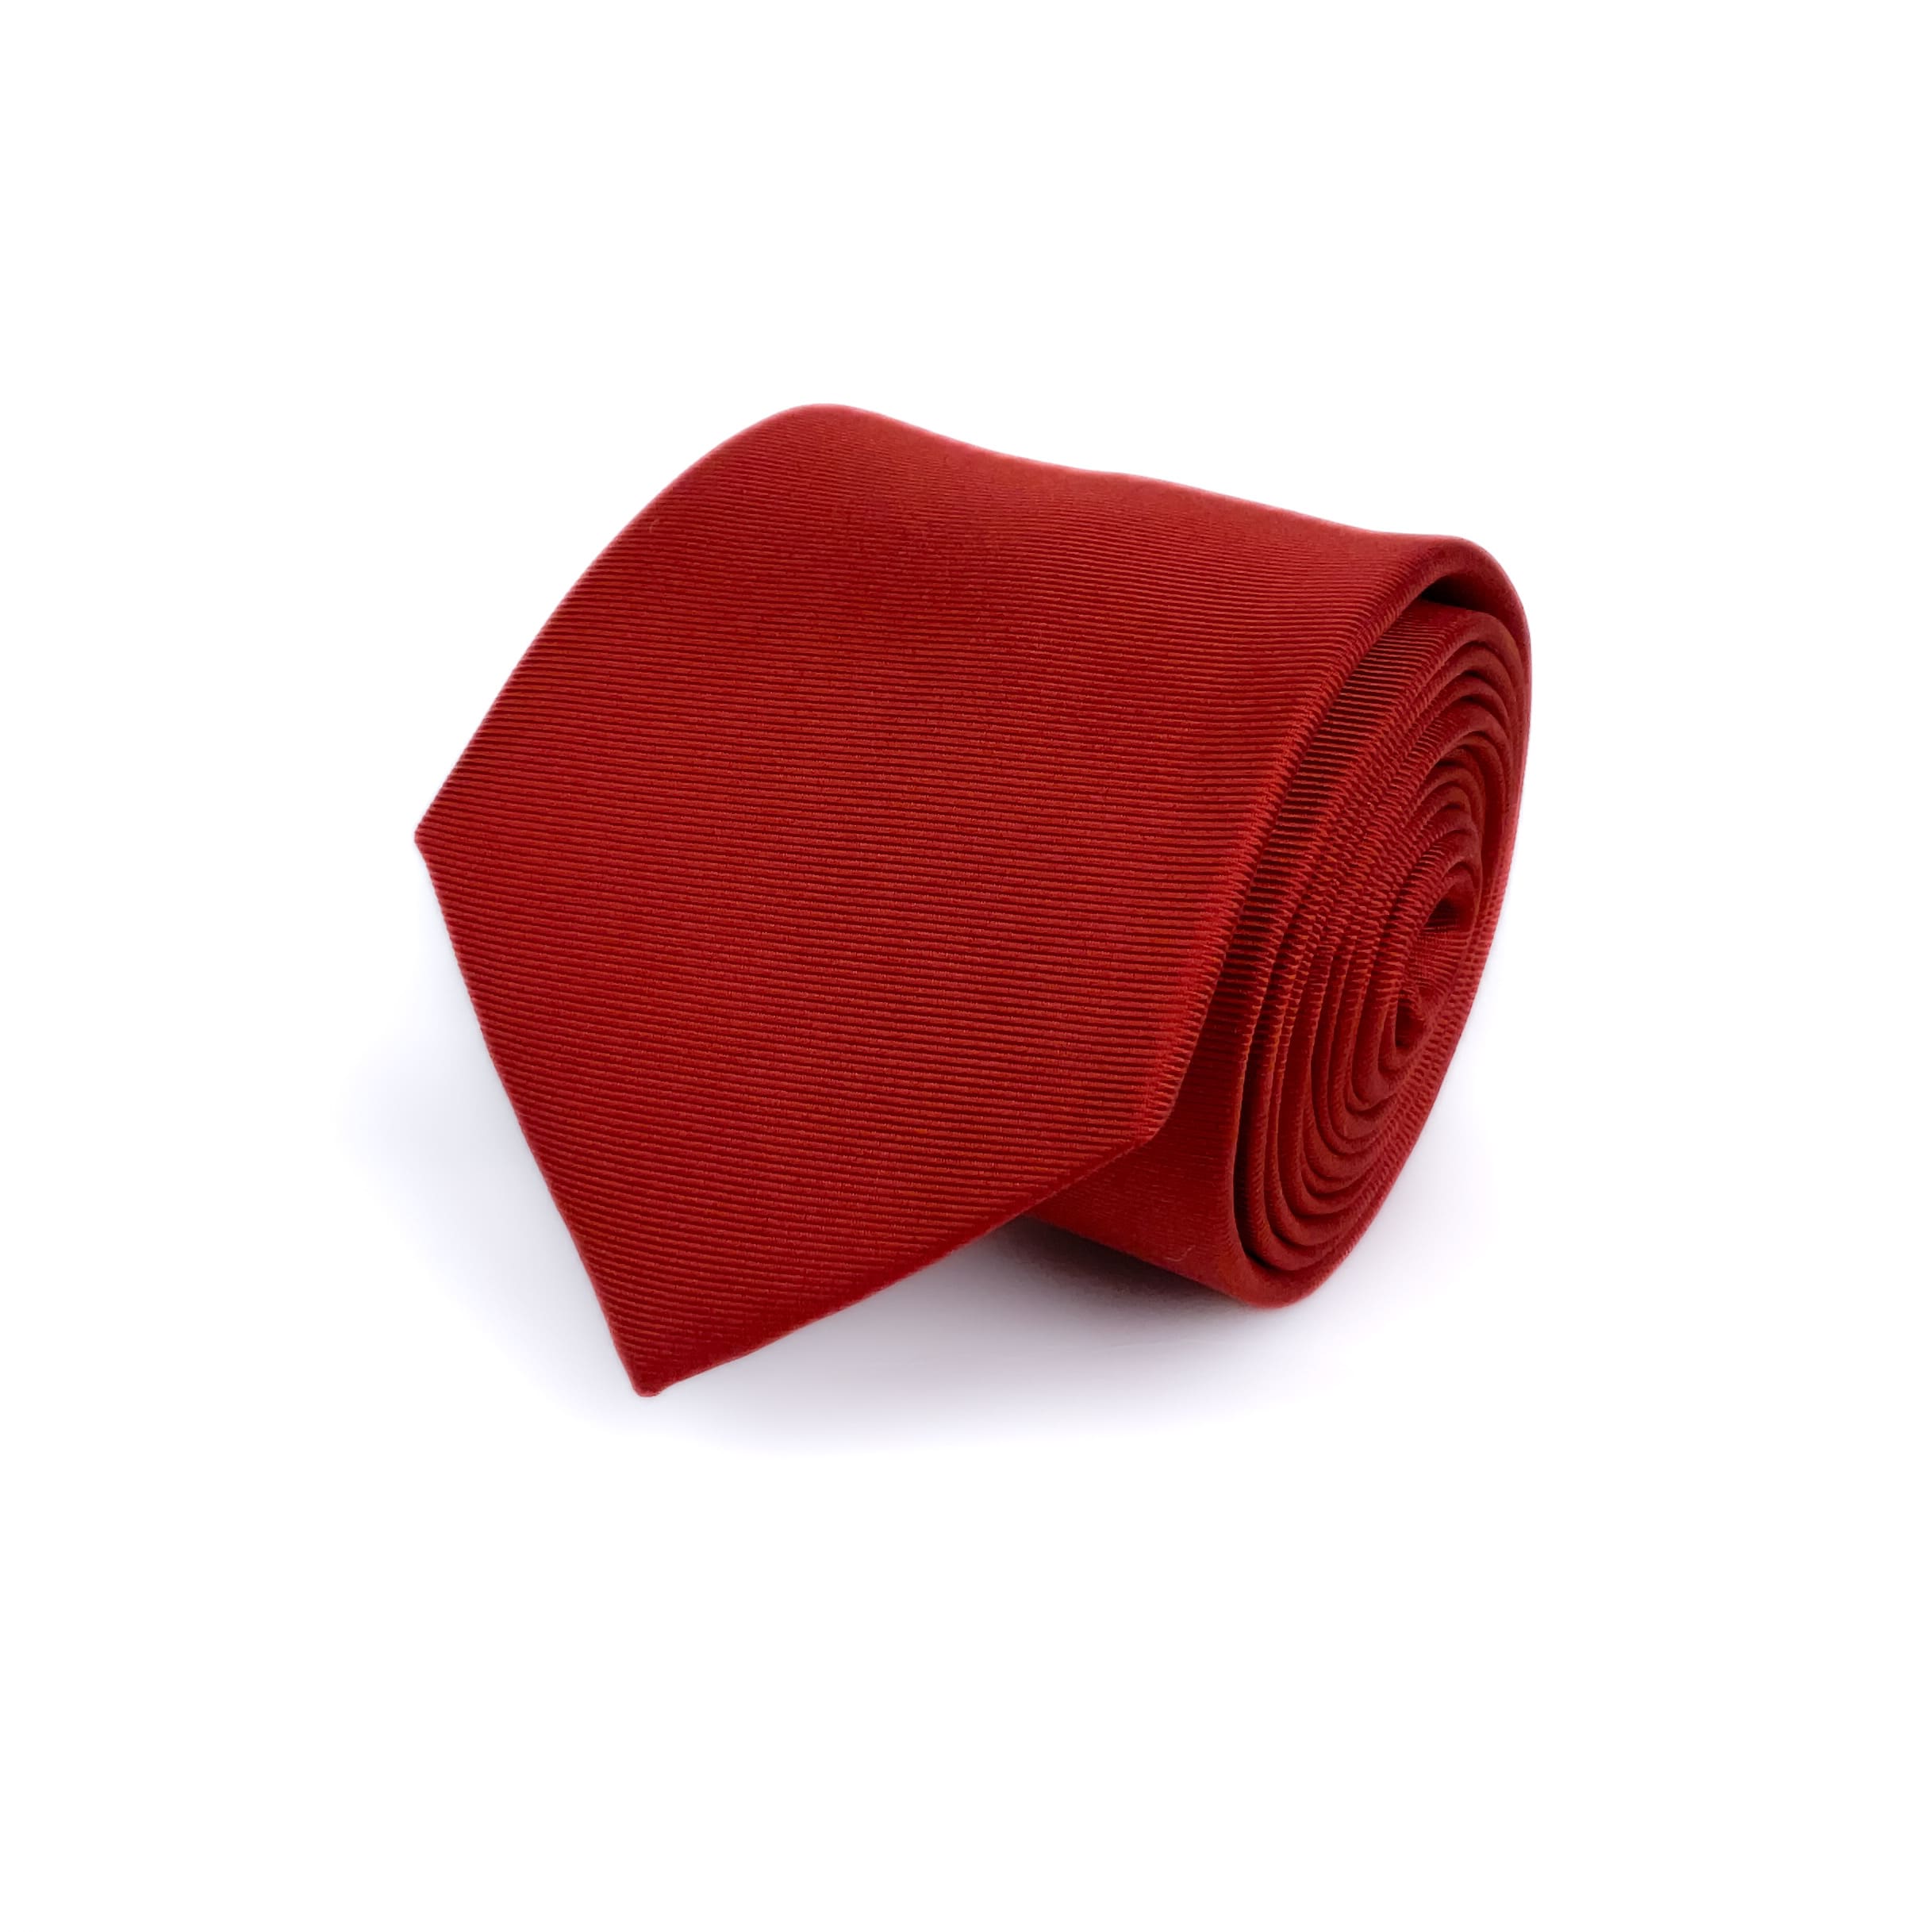 Valentine Red silk necktie rolled and placed on a white background